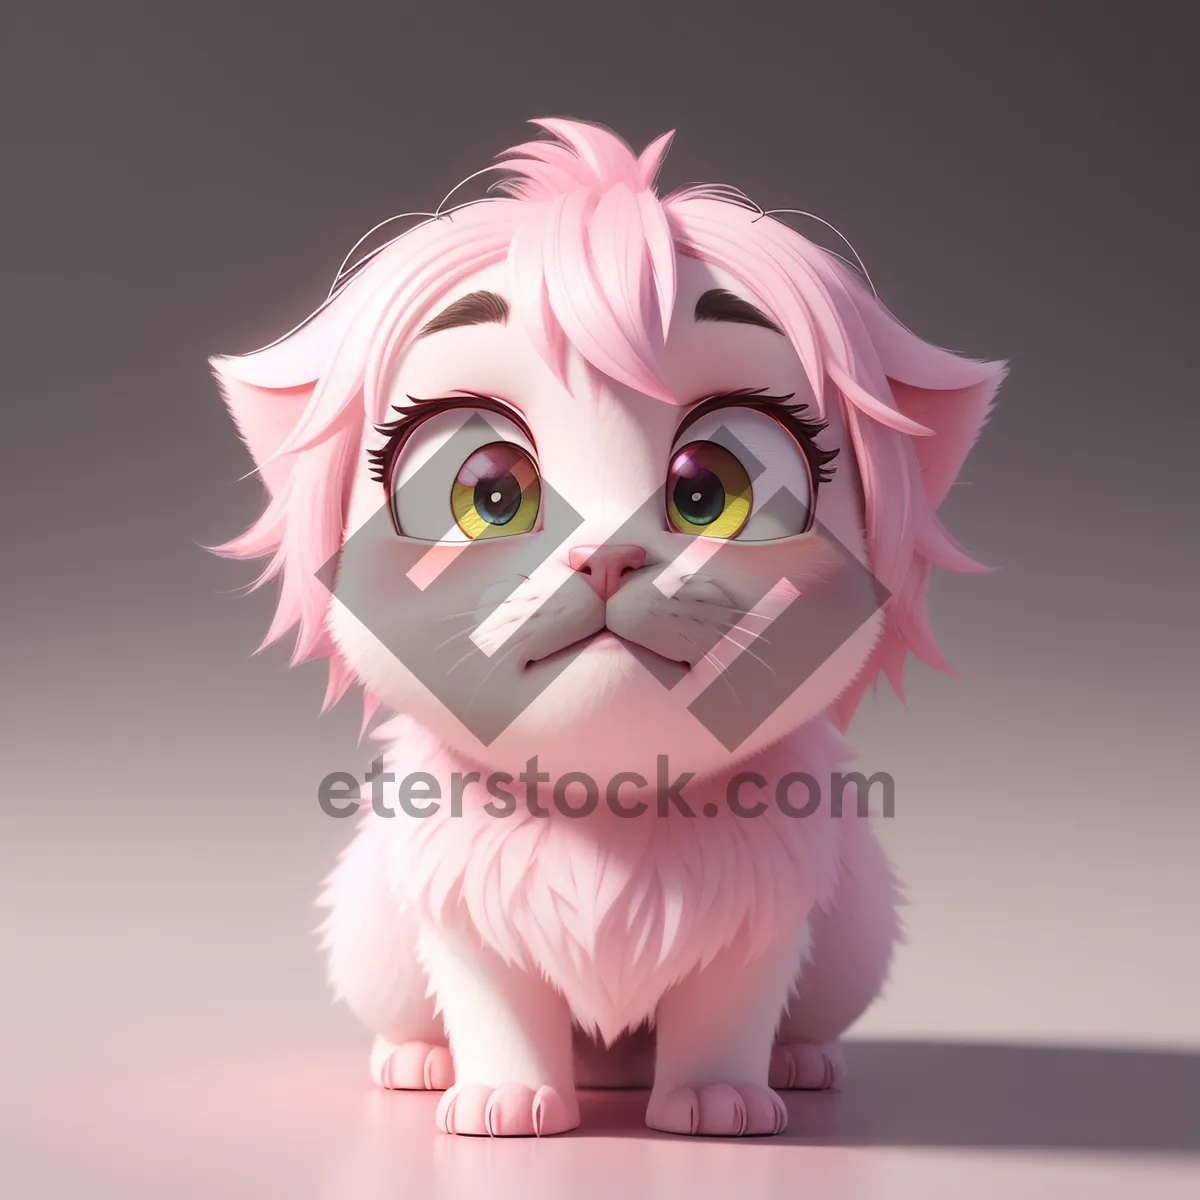 Picture of Cute and Happy Cartoon Baby Pig with Pink Ears